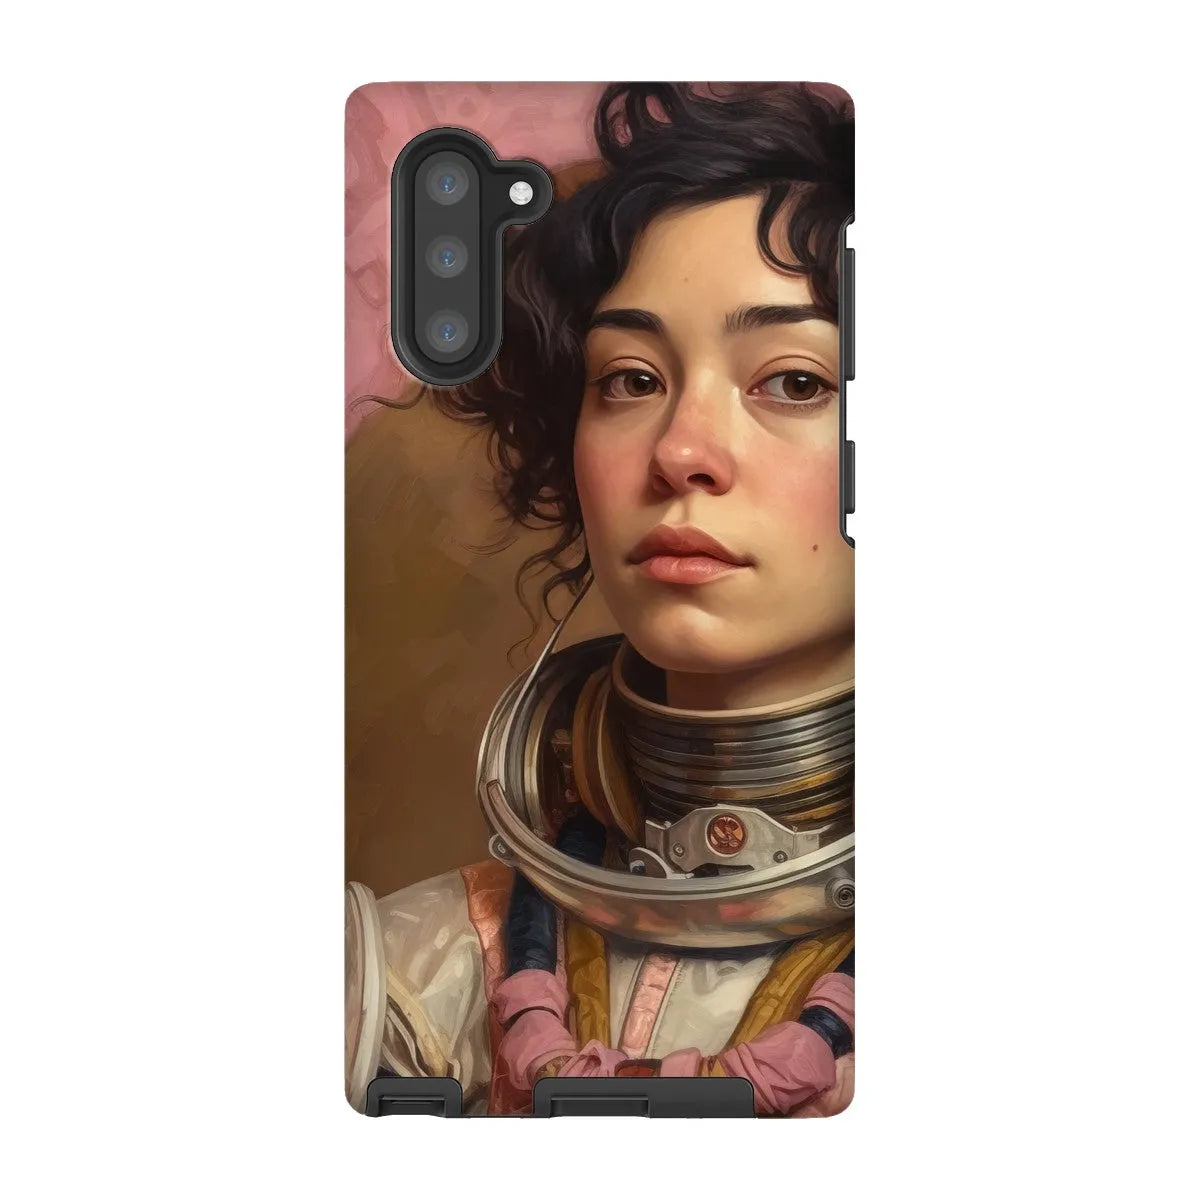 Faustina The Lesbian Astronaut - Lgbtq Art Phone Case - Samsung Galaxy Note 10 / Matte - Mobile Phone Cases - Aesthetic